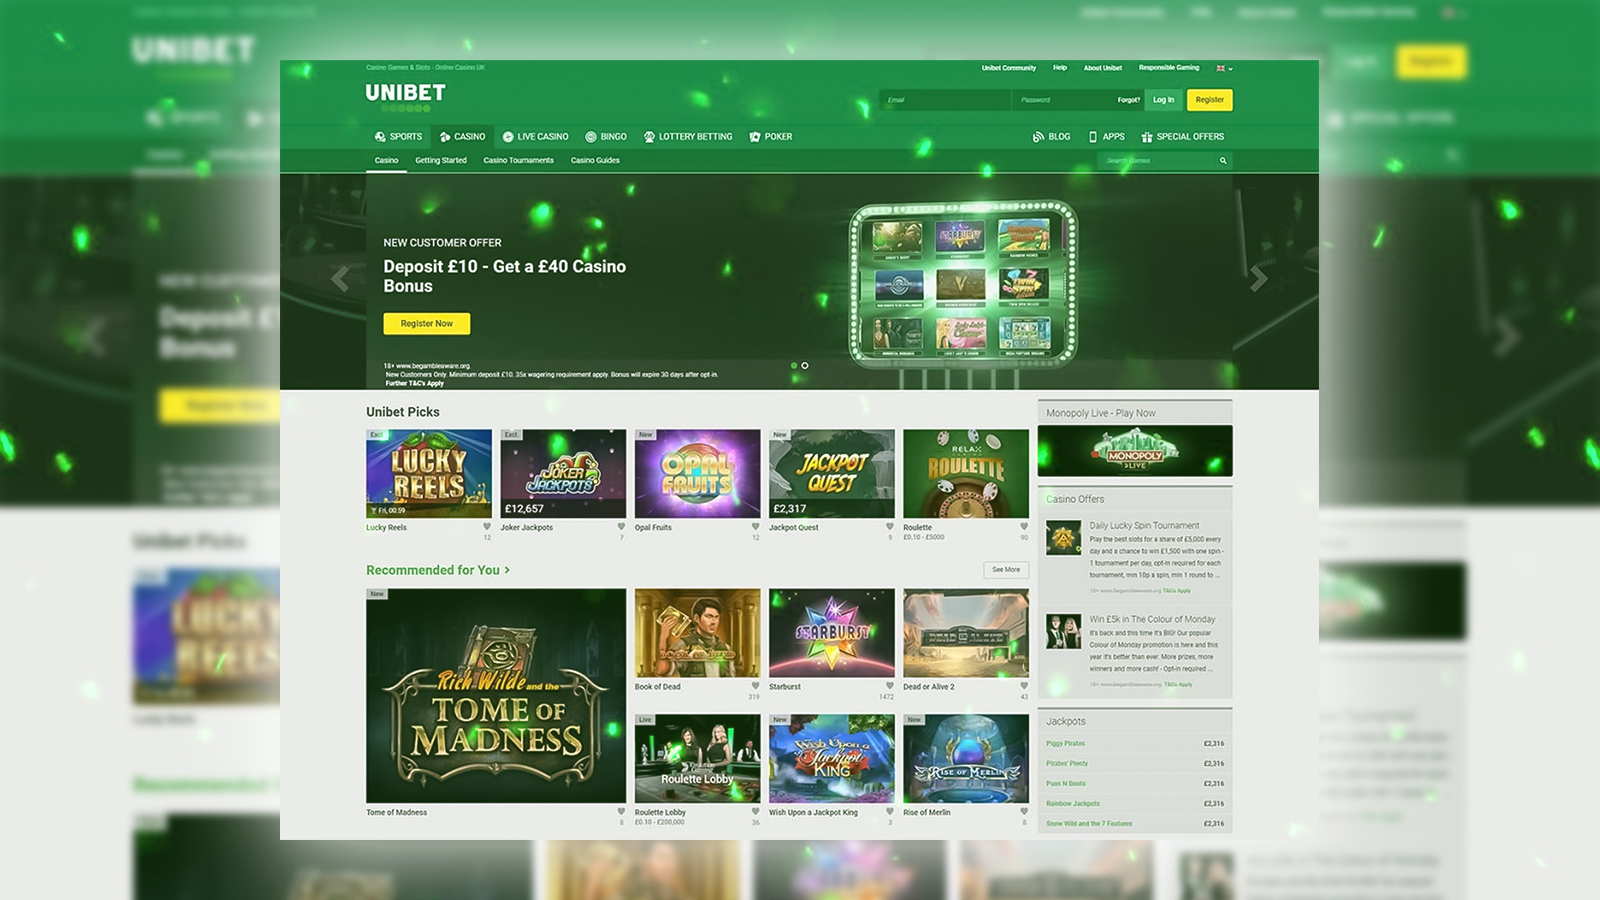 Join Unibet and enjoy casino games and sports betting.